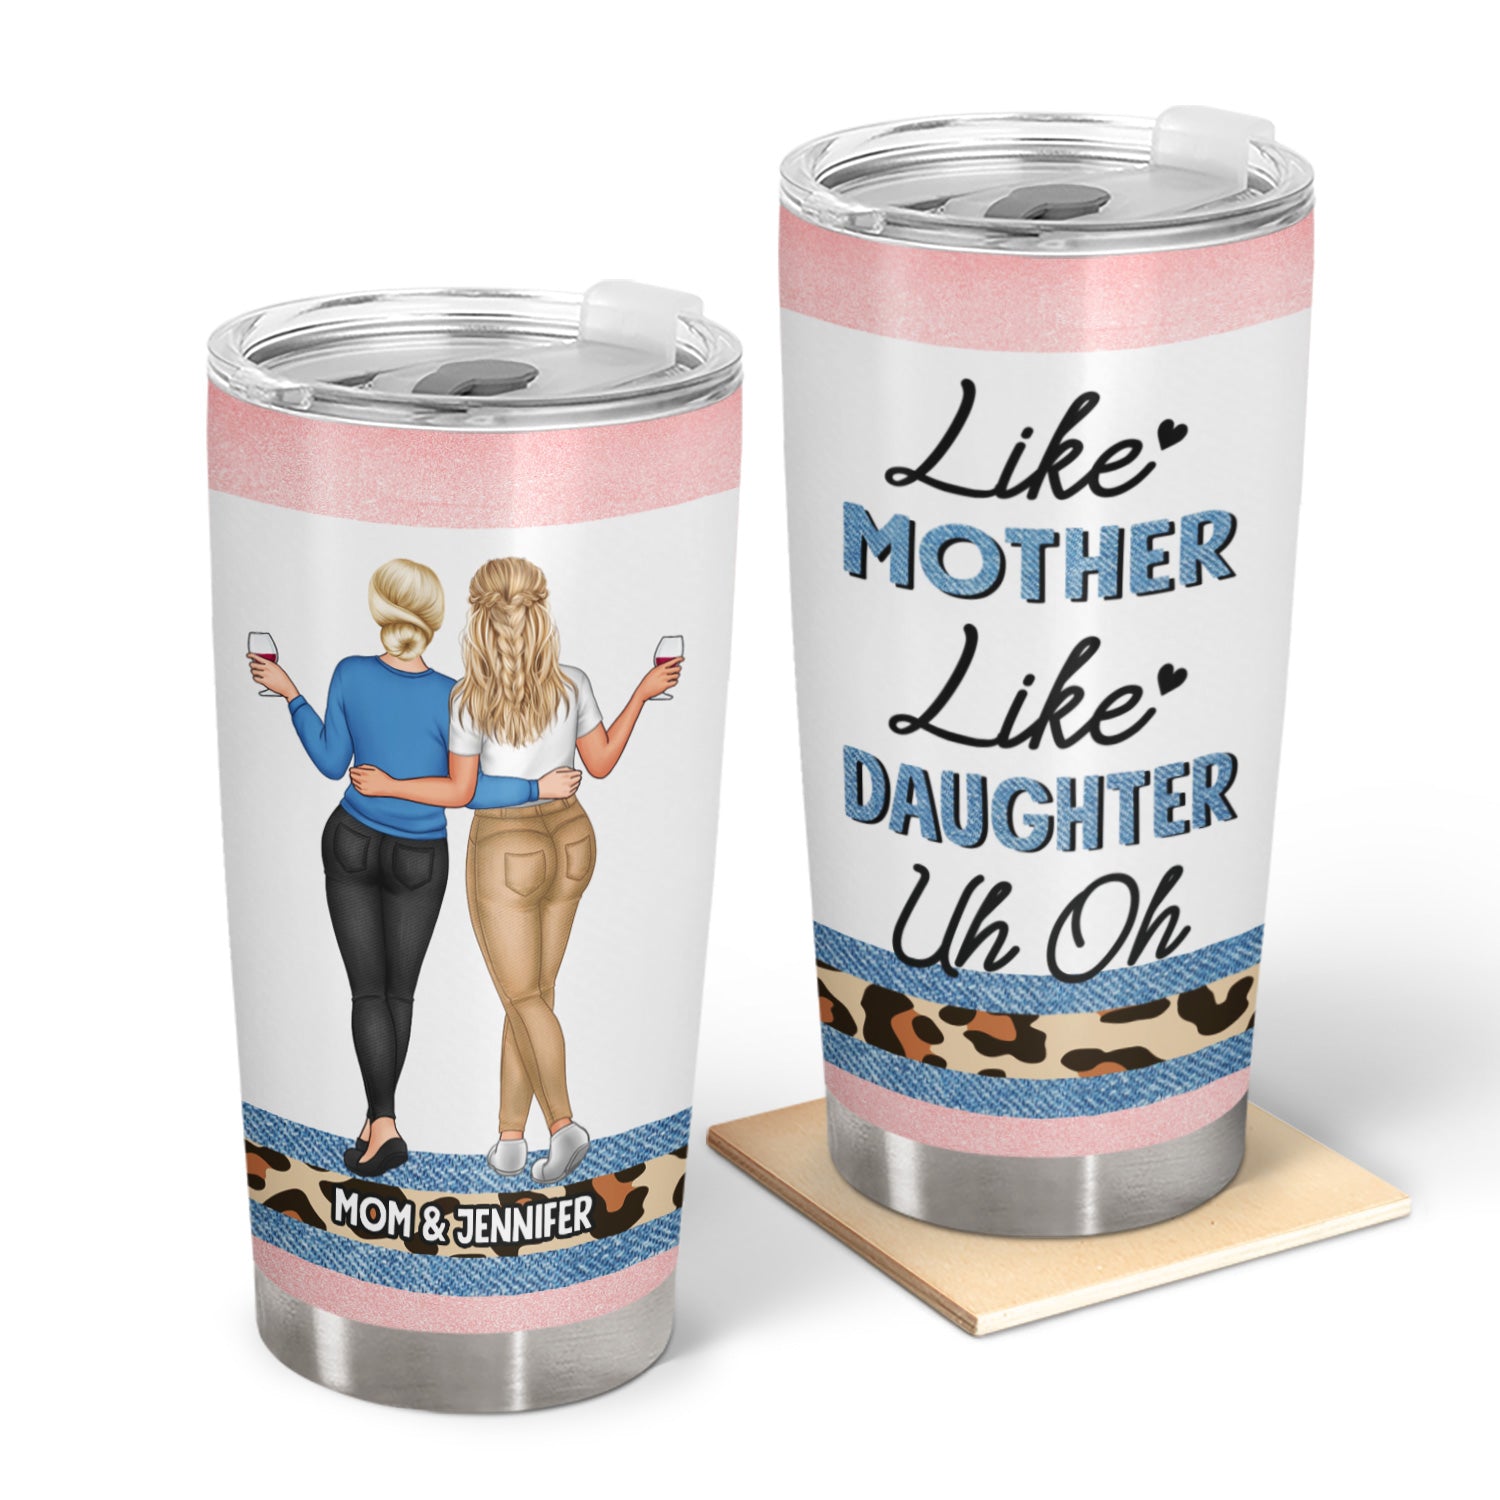 Like Mother Like Daughter Uh Oh - Gift For Mother - Personalized Tumbler